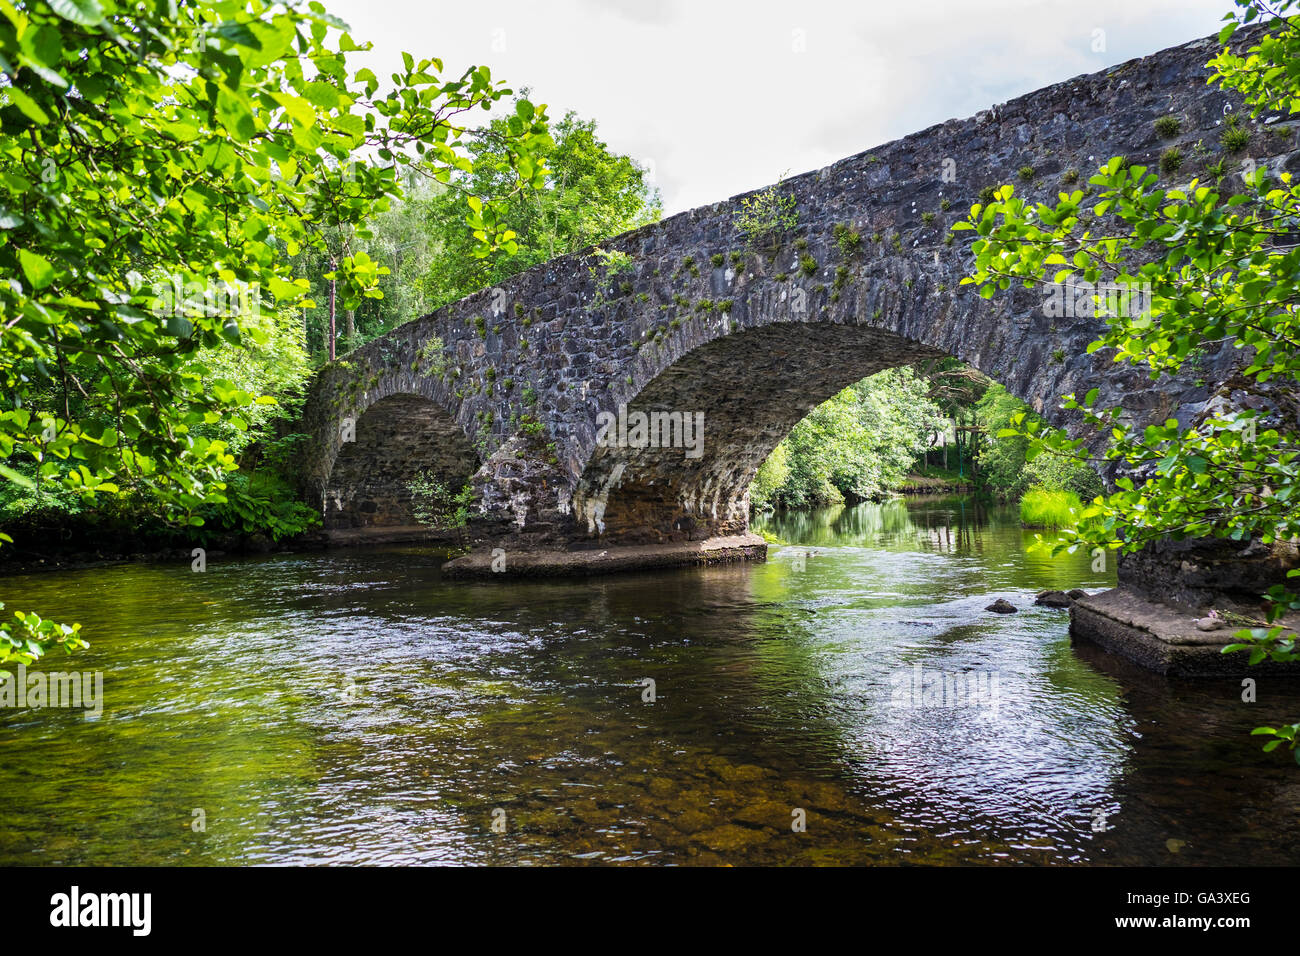 The arches of the stone hump back bridge over the River Balvag at Balquhidder, Scotland. Stock Photo